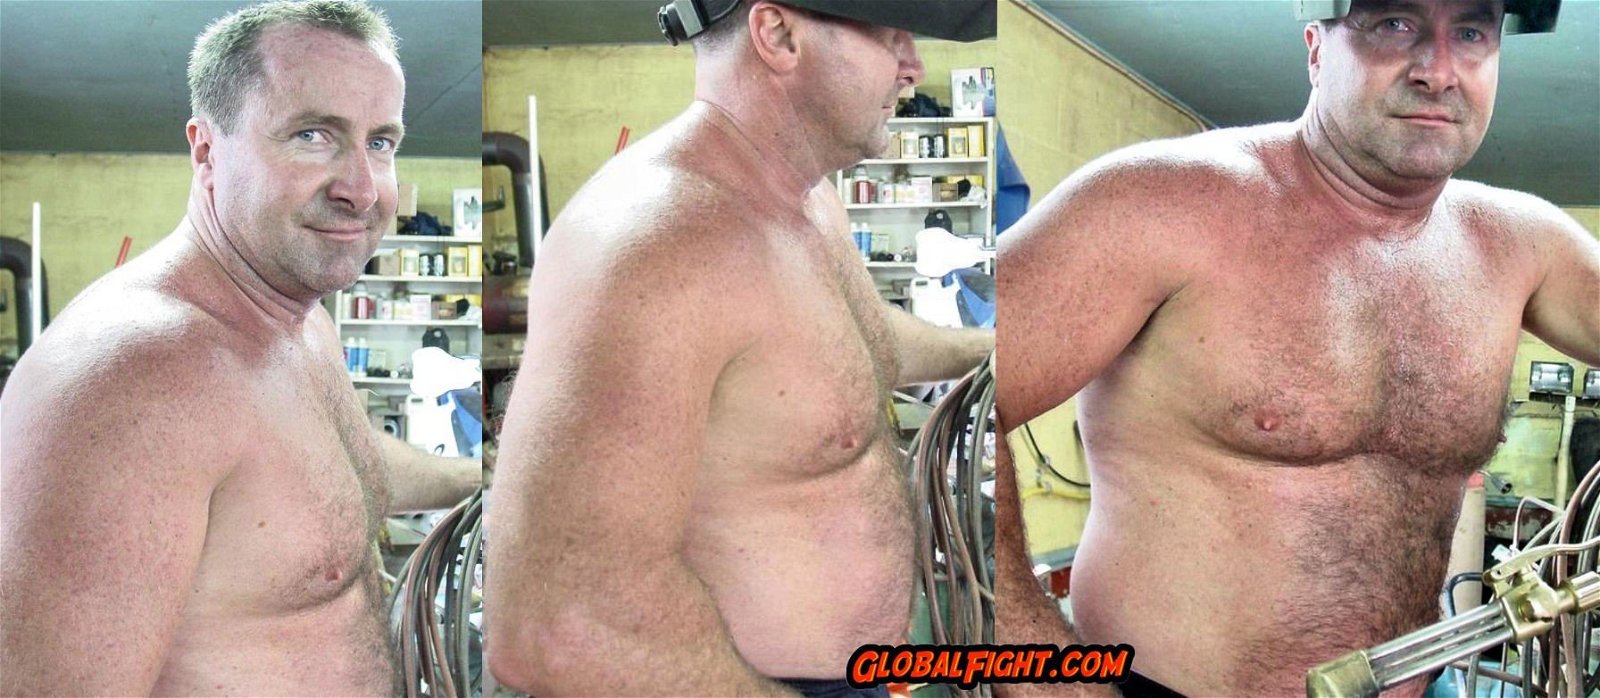 Photo by Hairy Musclebears with the username @hairymusclebears,  February 3, 2023 at 1:27 PM. The post is about the topic Carolina Jim Musclebear and the text says 'Working Shirtless VIEW THE NUDE VIDEO on his page at GLOBALFIGHT com  --  #hotdaddy #hairybear #hairybelly #hairydaddy #gaydaddybear #gaydaddies #hairymuscle #dilf #dilfs #strongdad #bigdaddy #hairypecs #gaybear #gaybears #gay #gayboy #gayman #gaymen'